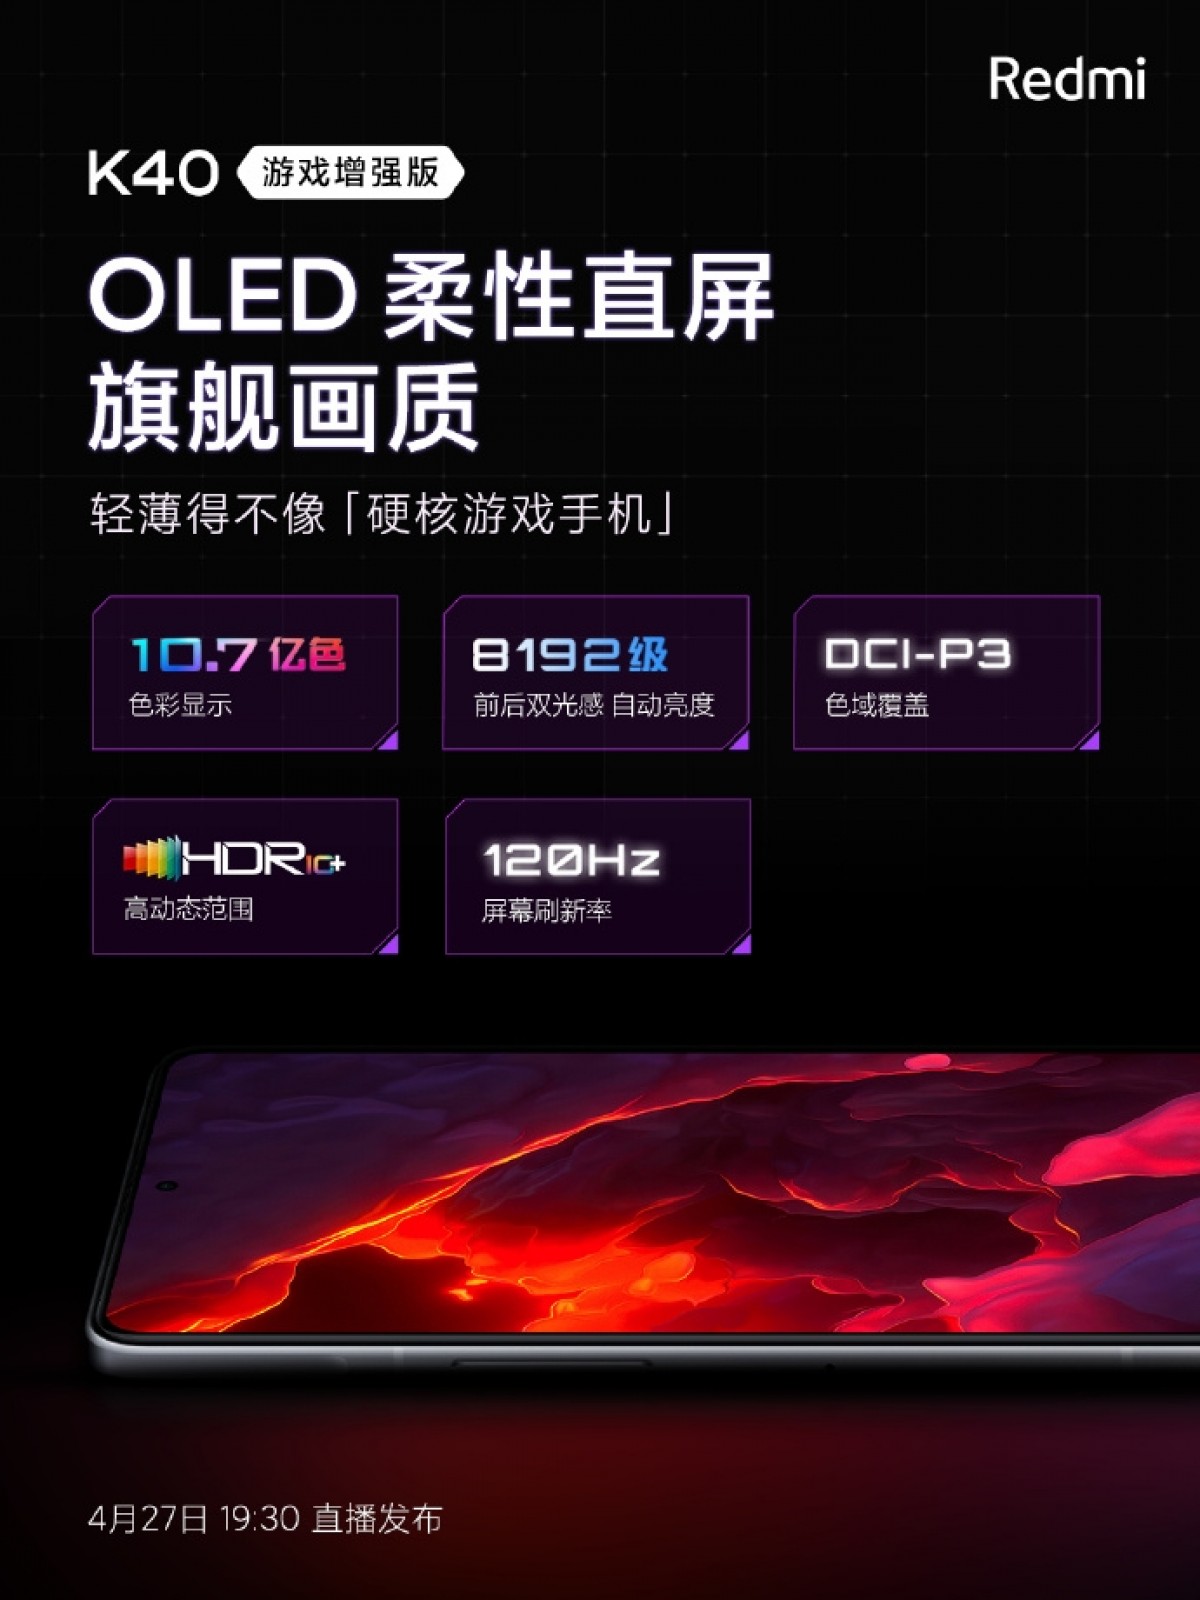 Redmi K40 Gaming to have an OLED screen with 120Hz refresh rate